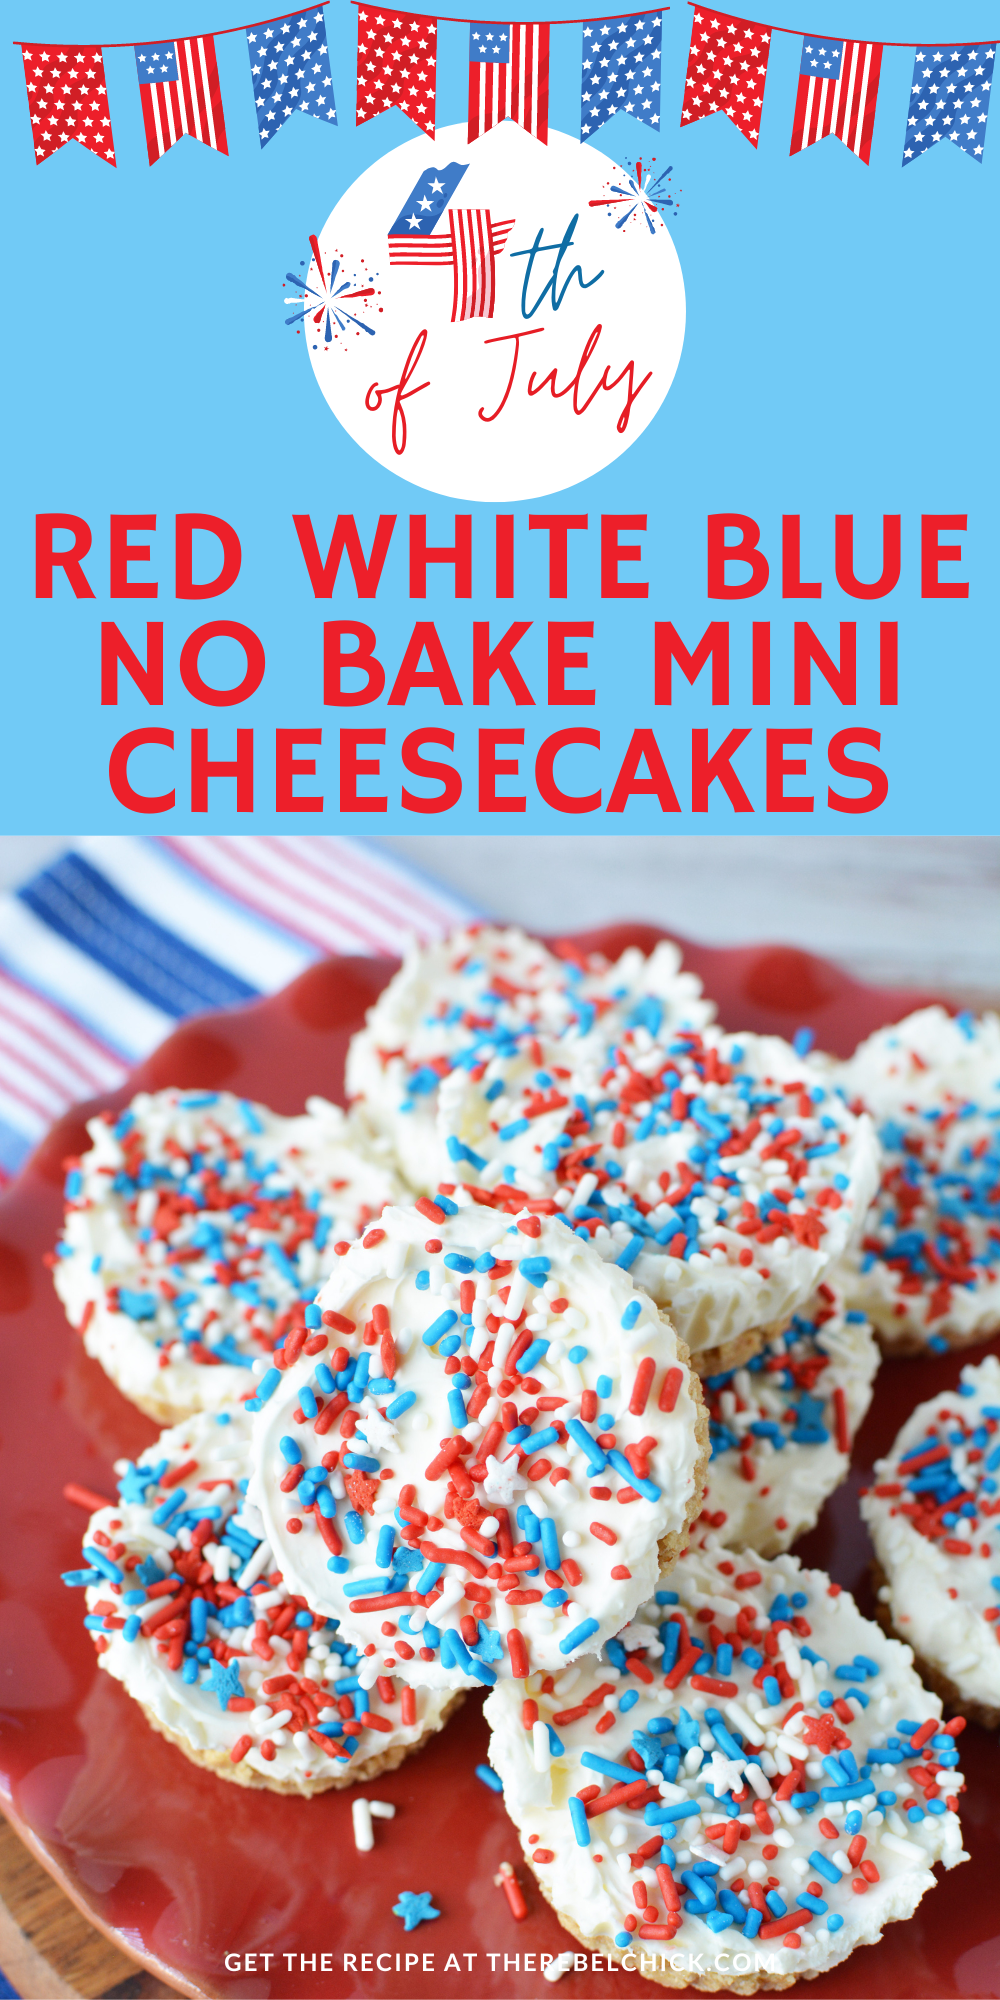 Red White & Blue Cheesecakes Recipe